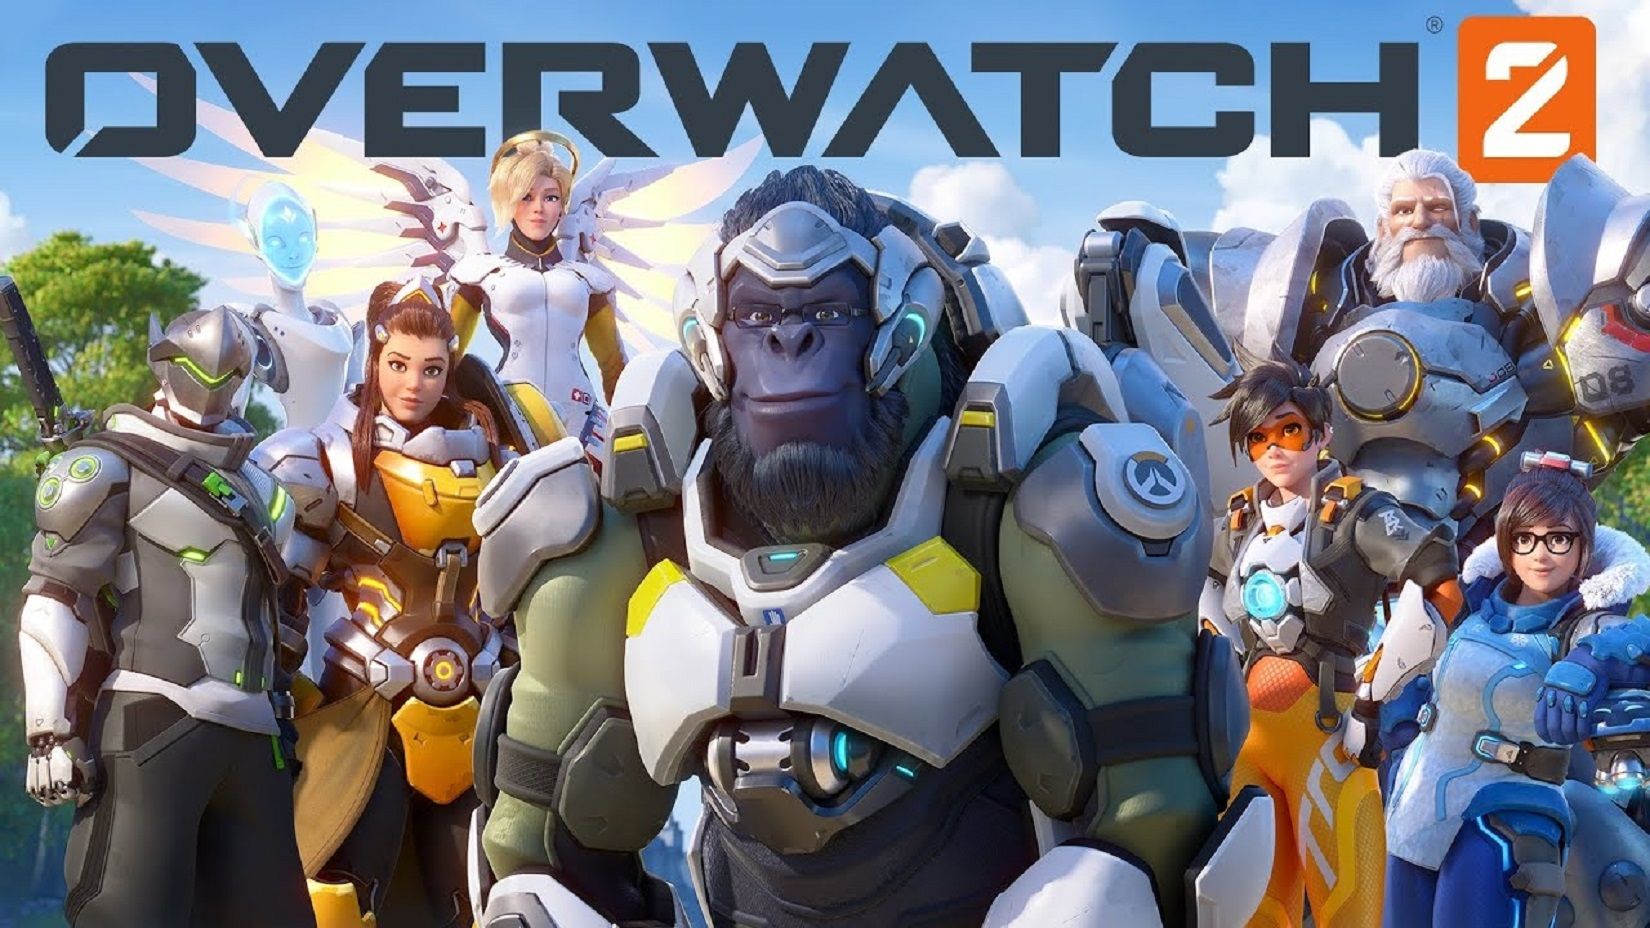 10 overwatch codes pc may 2018